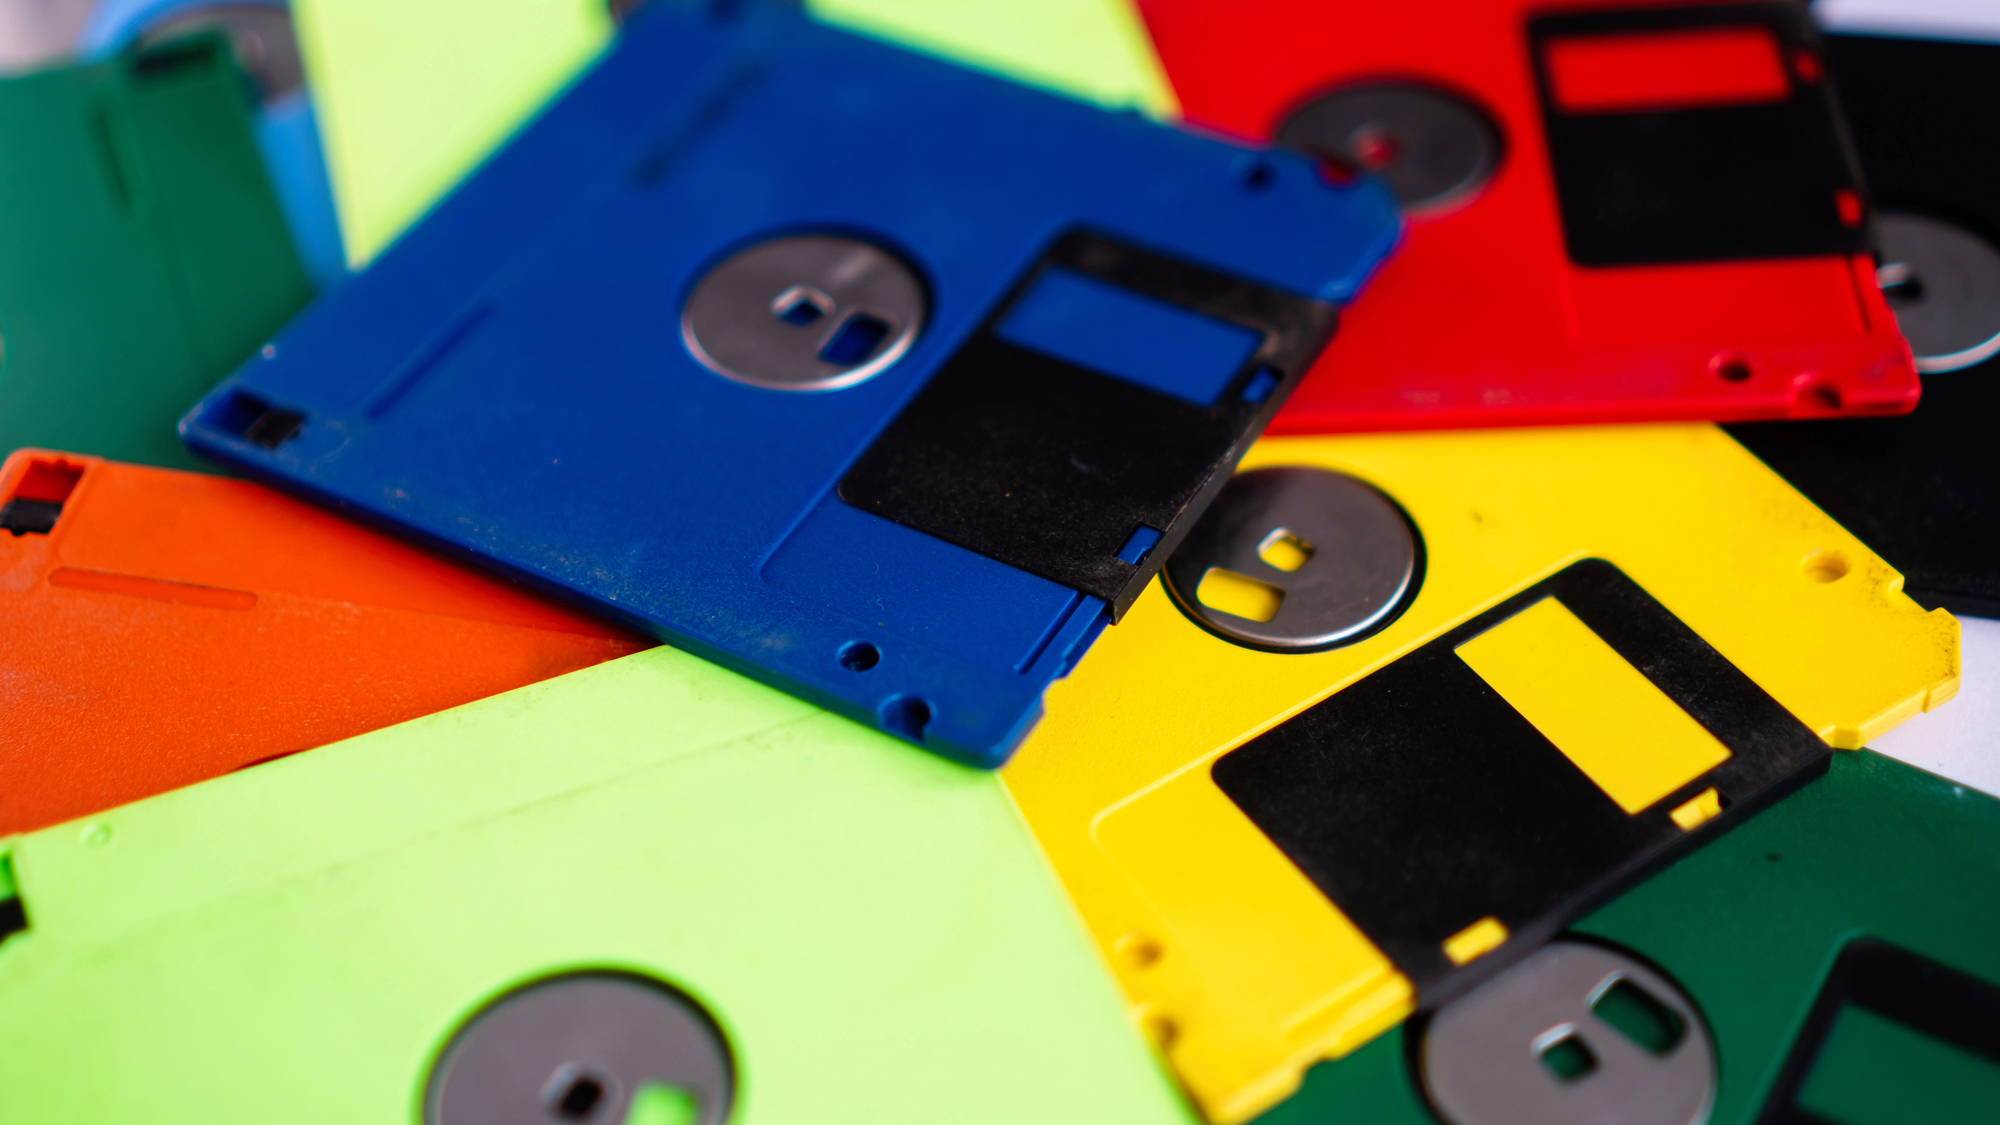 Japan’s government is (finally) done with floppy disks